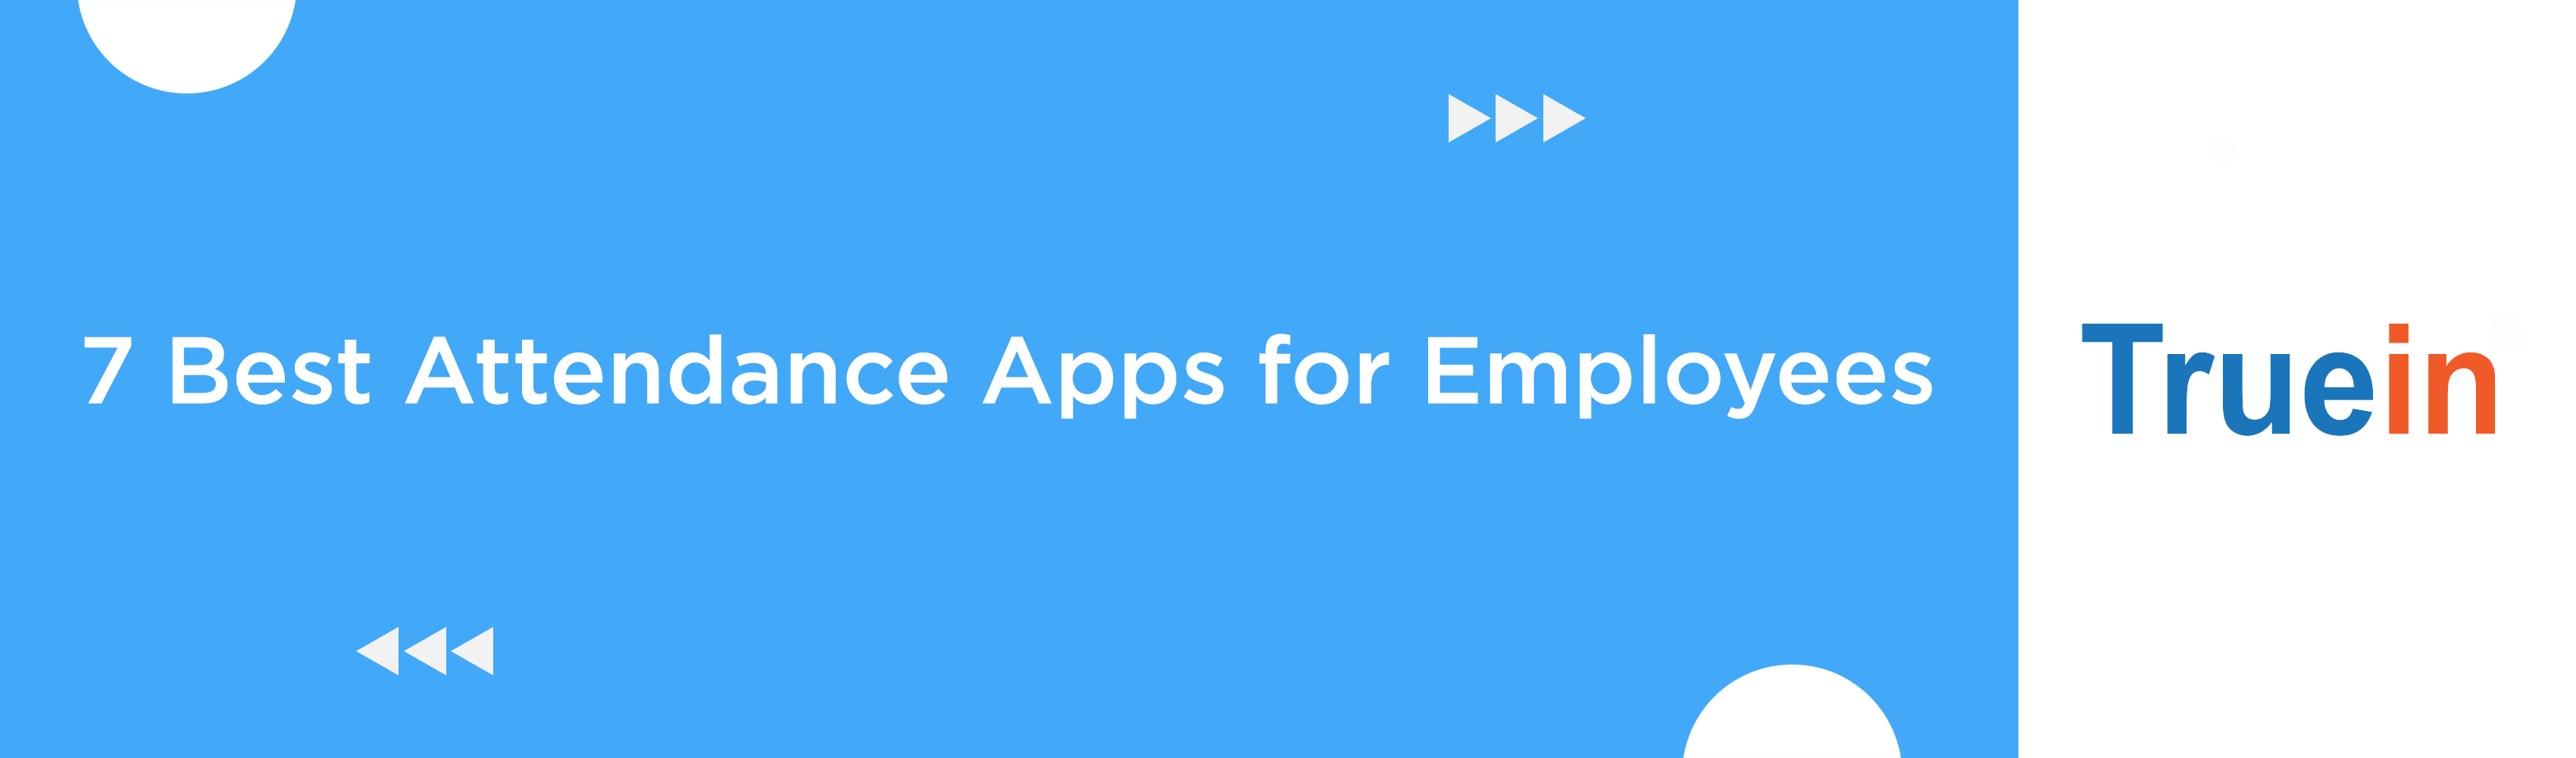 7 Best Attendance Apps for Employees